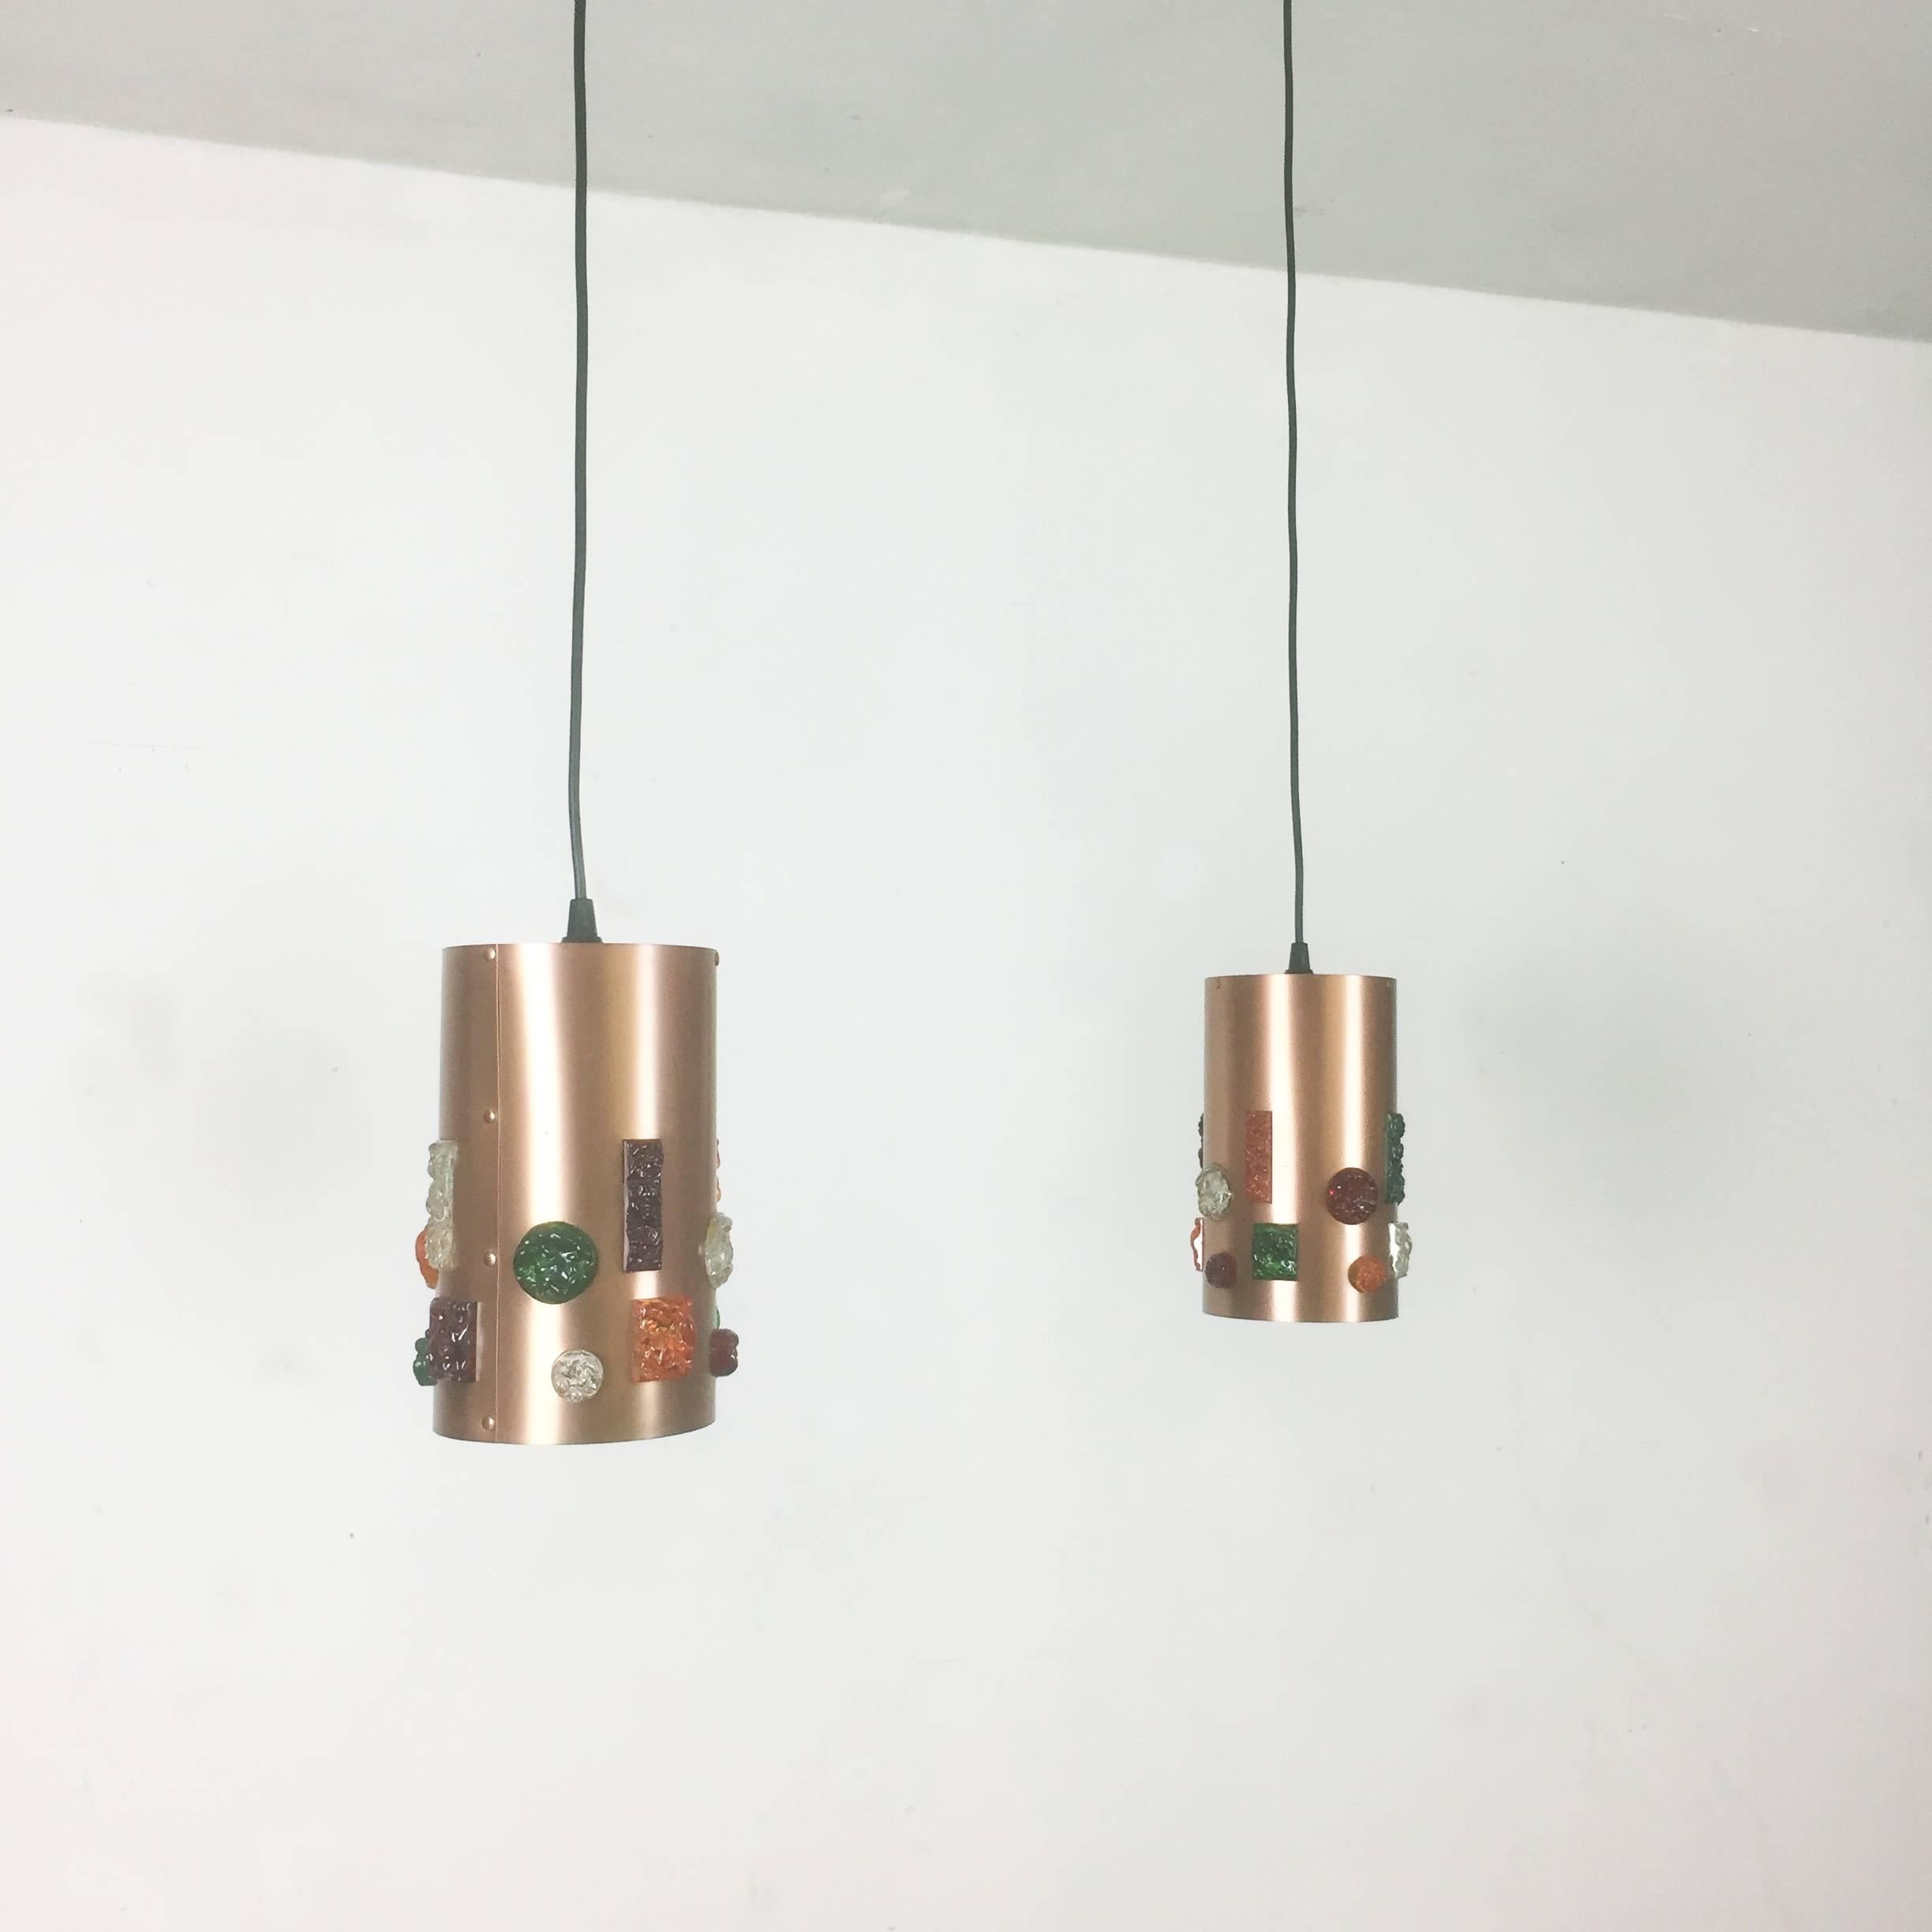 Set of Two Original German Copper Hanging Light, Germany, 1970s For Sale 6